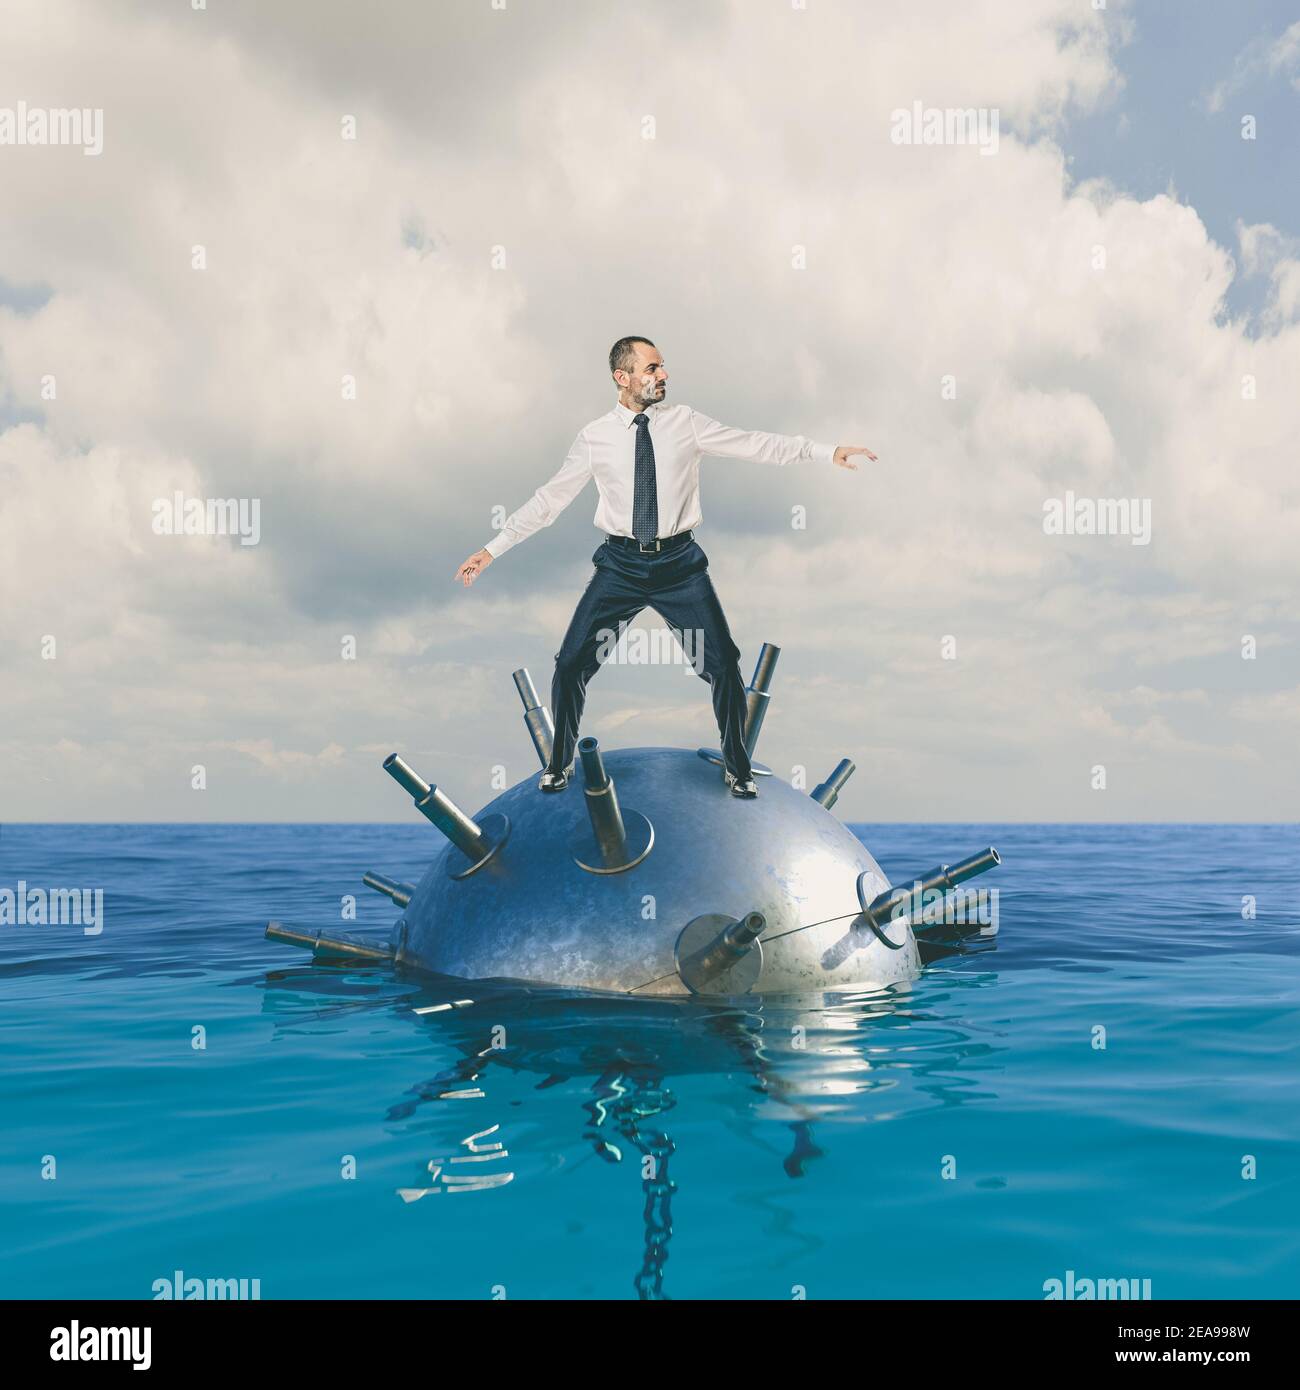 businessman rides a mine into the sea. concept of danger and risk. Stock Photo